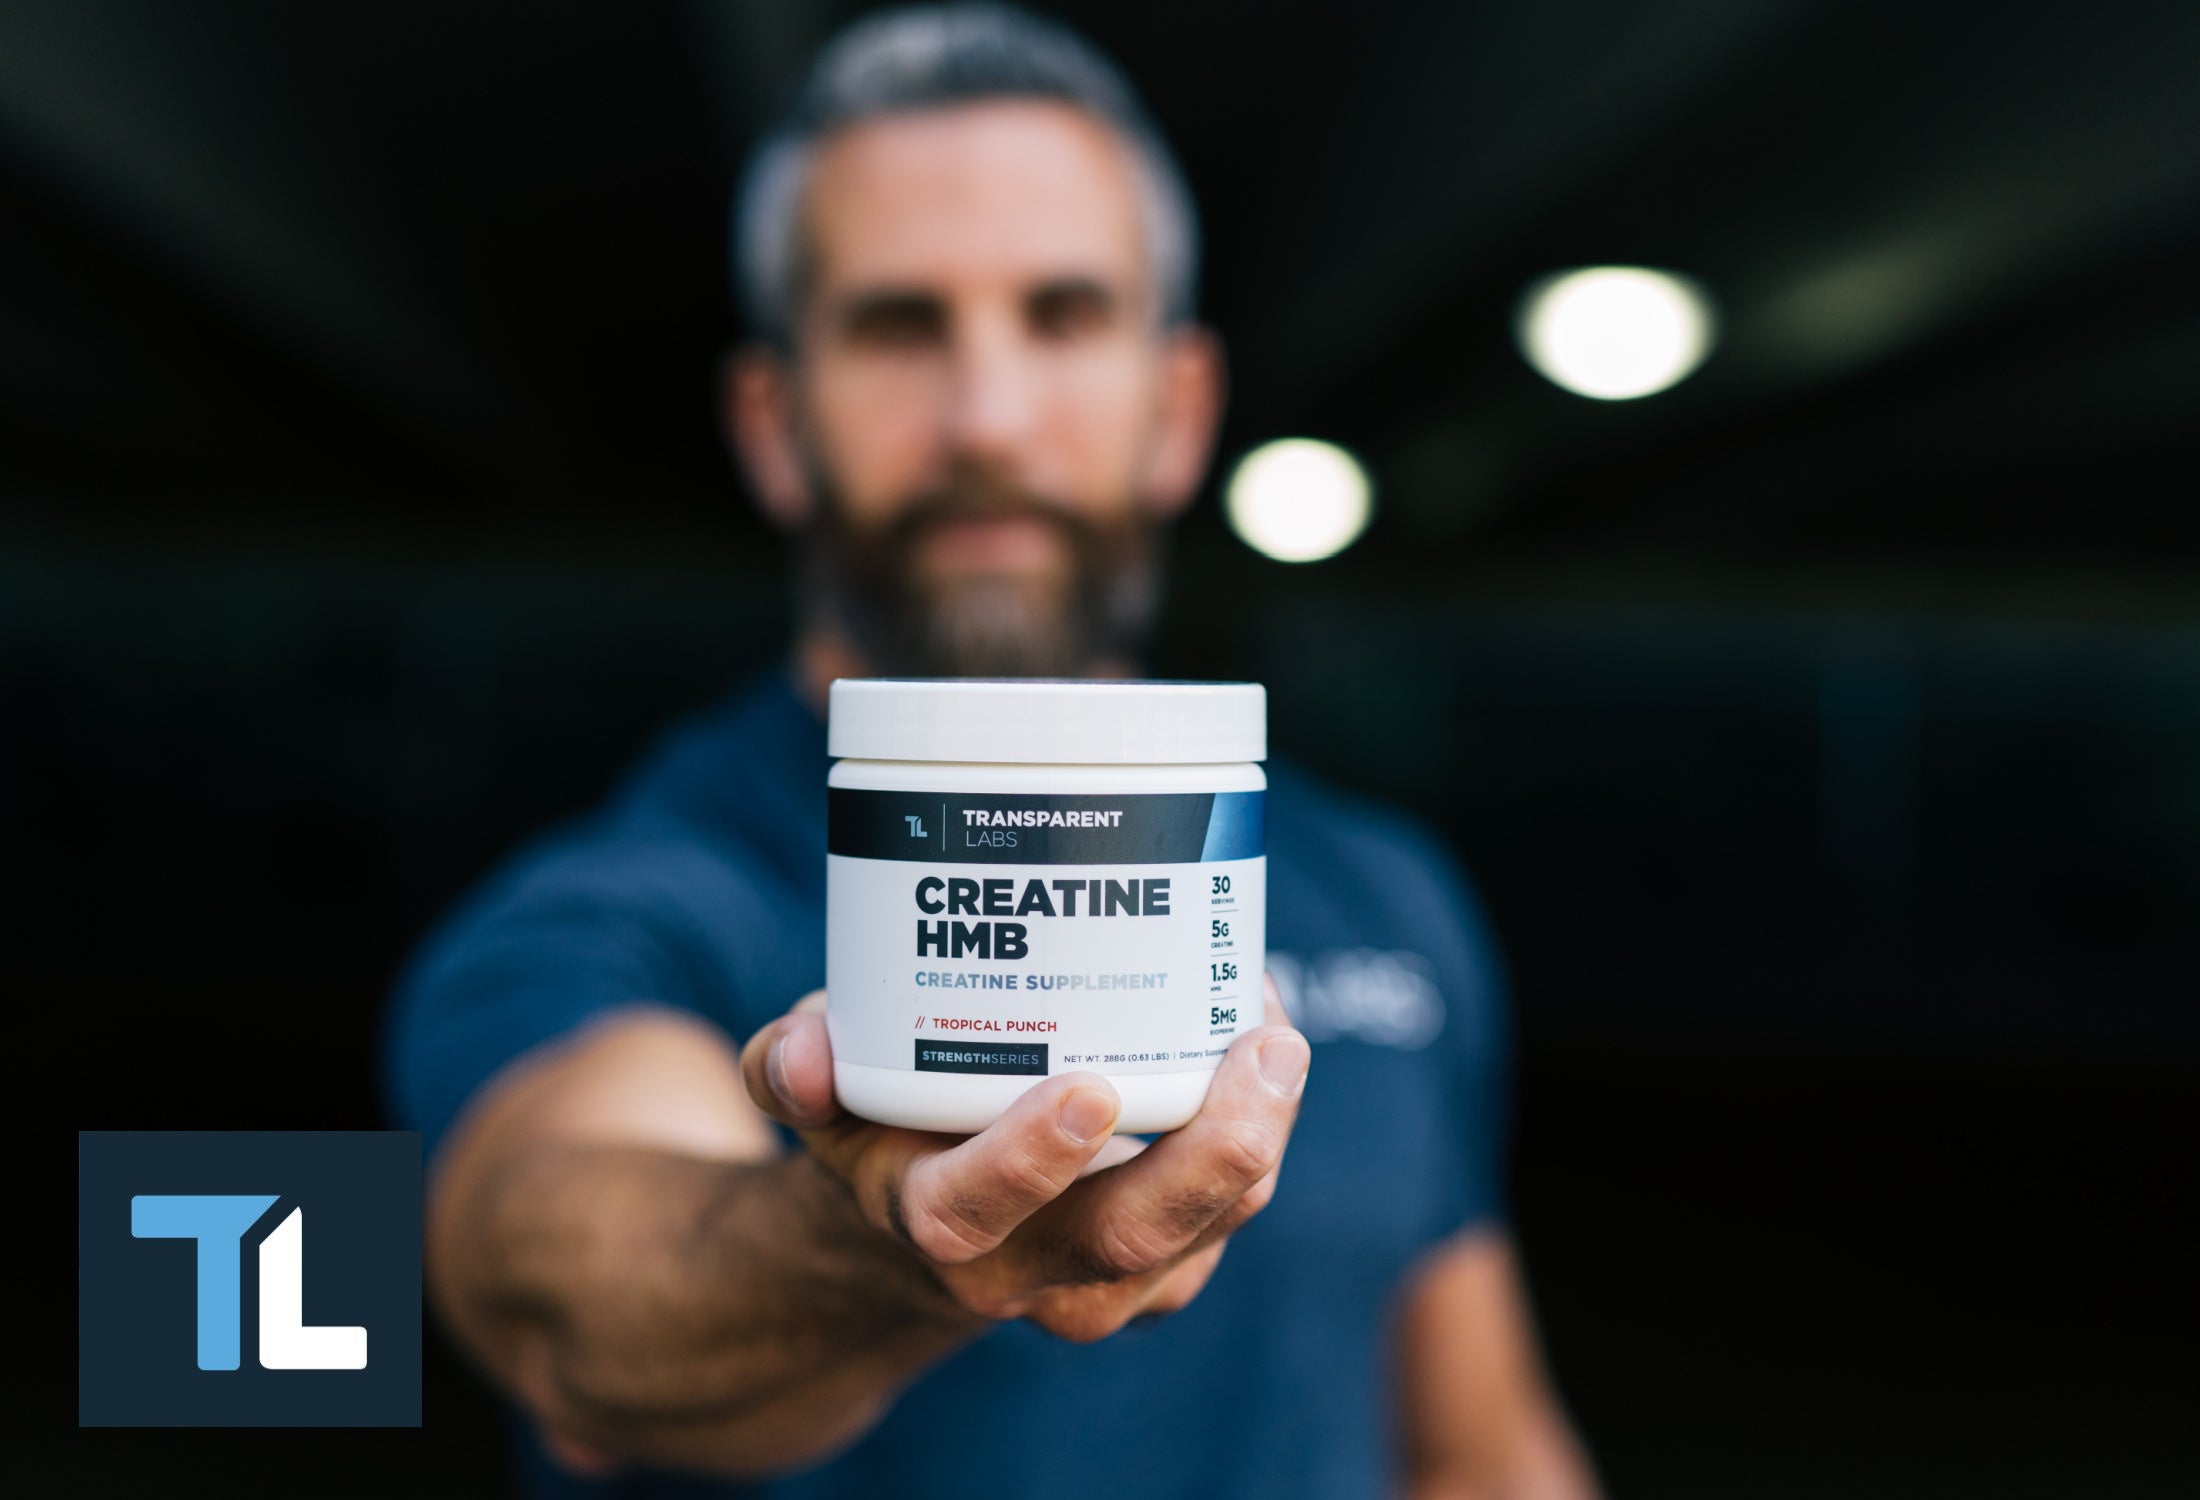 One Sol Creatine for the win! And some frequently asked questions